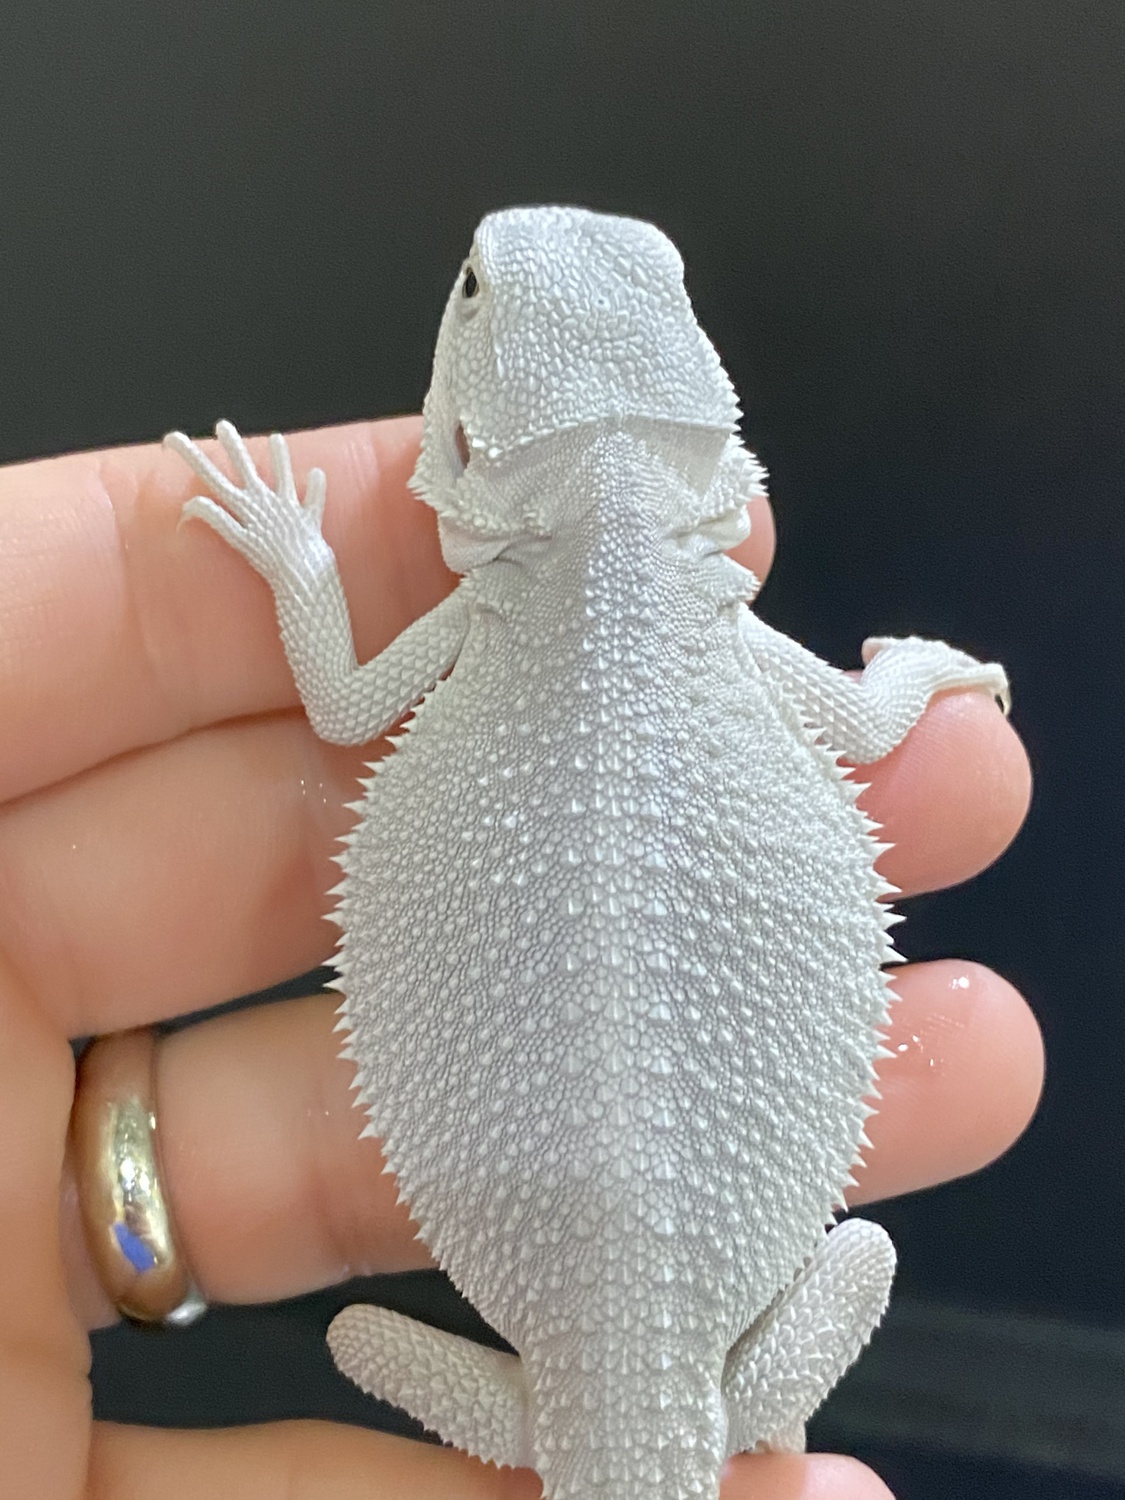 Hypo, Wero Central Bearded Dragon by Andrew's Reptiles LLC